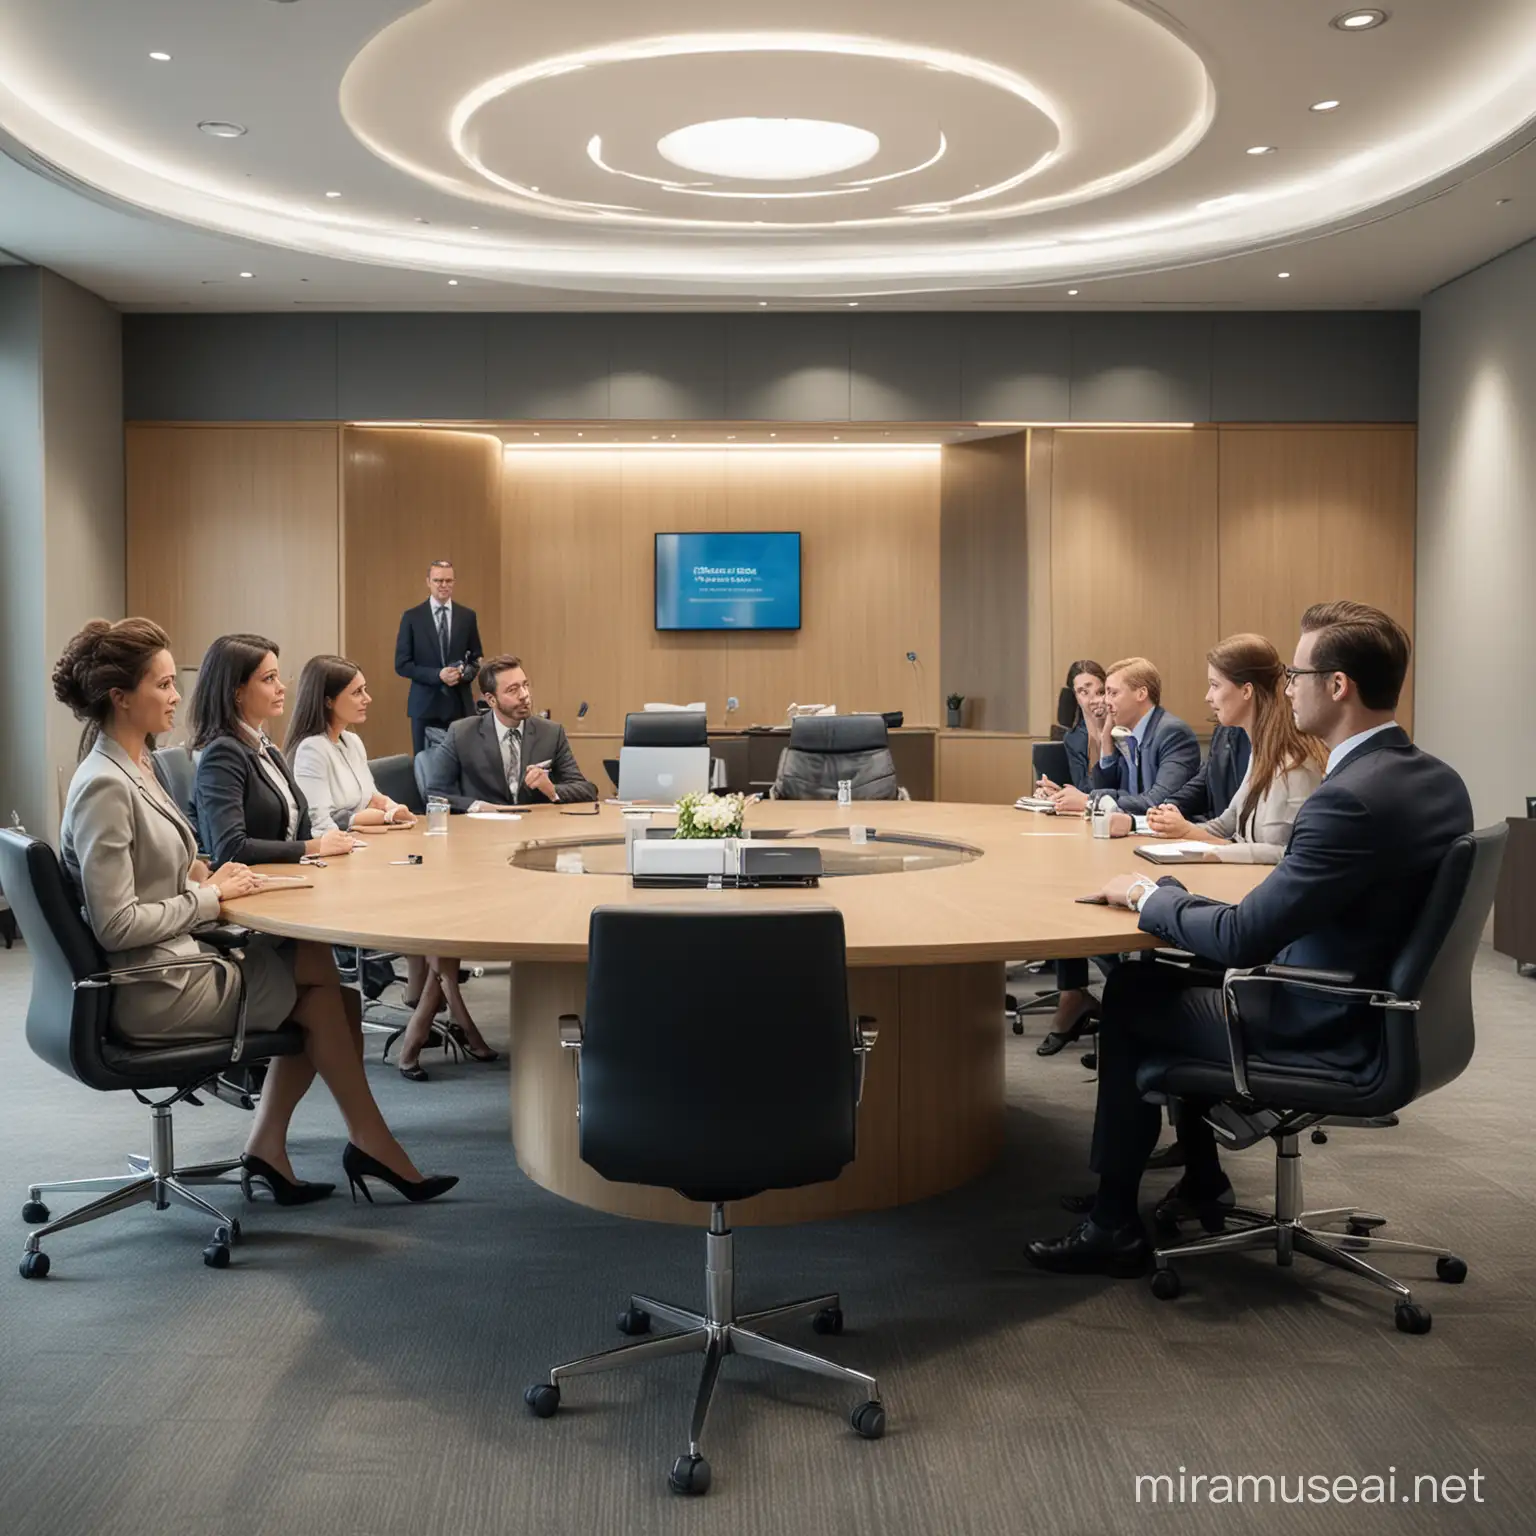 Professional Bank Agents in a Formal Meeting